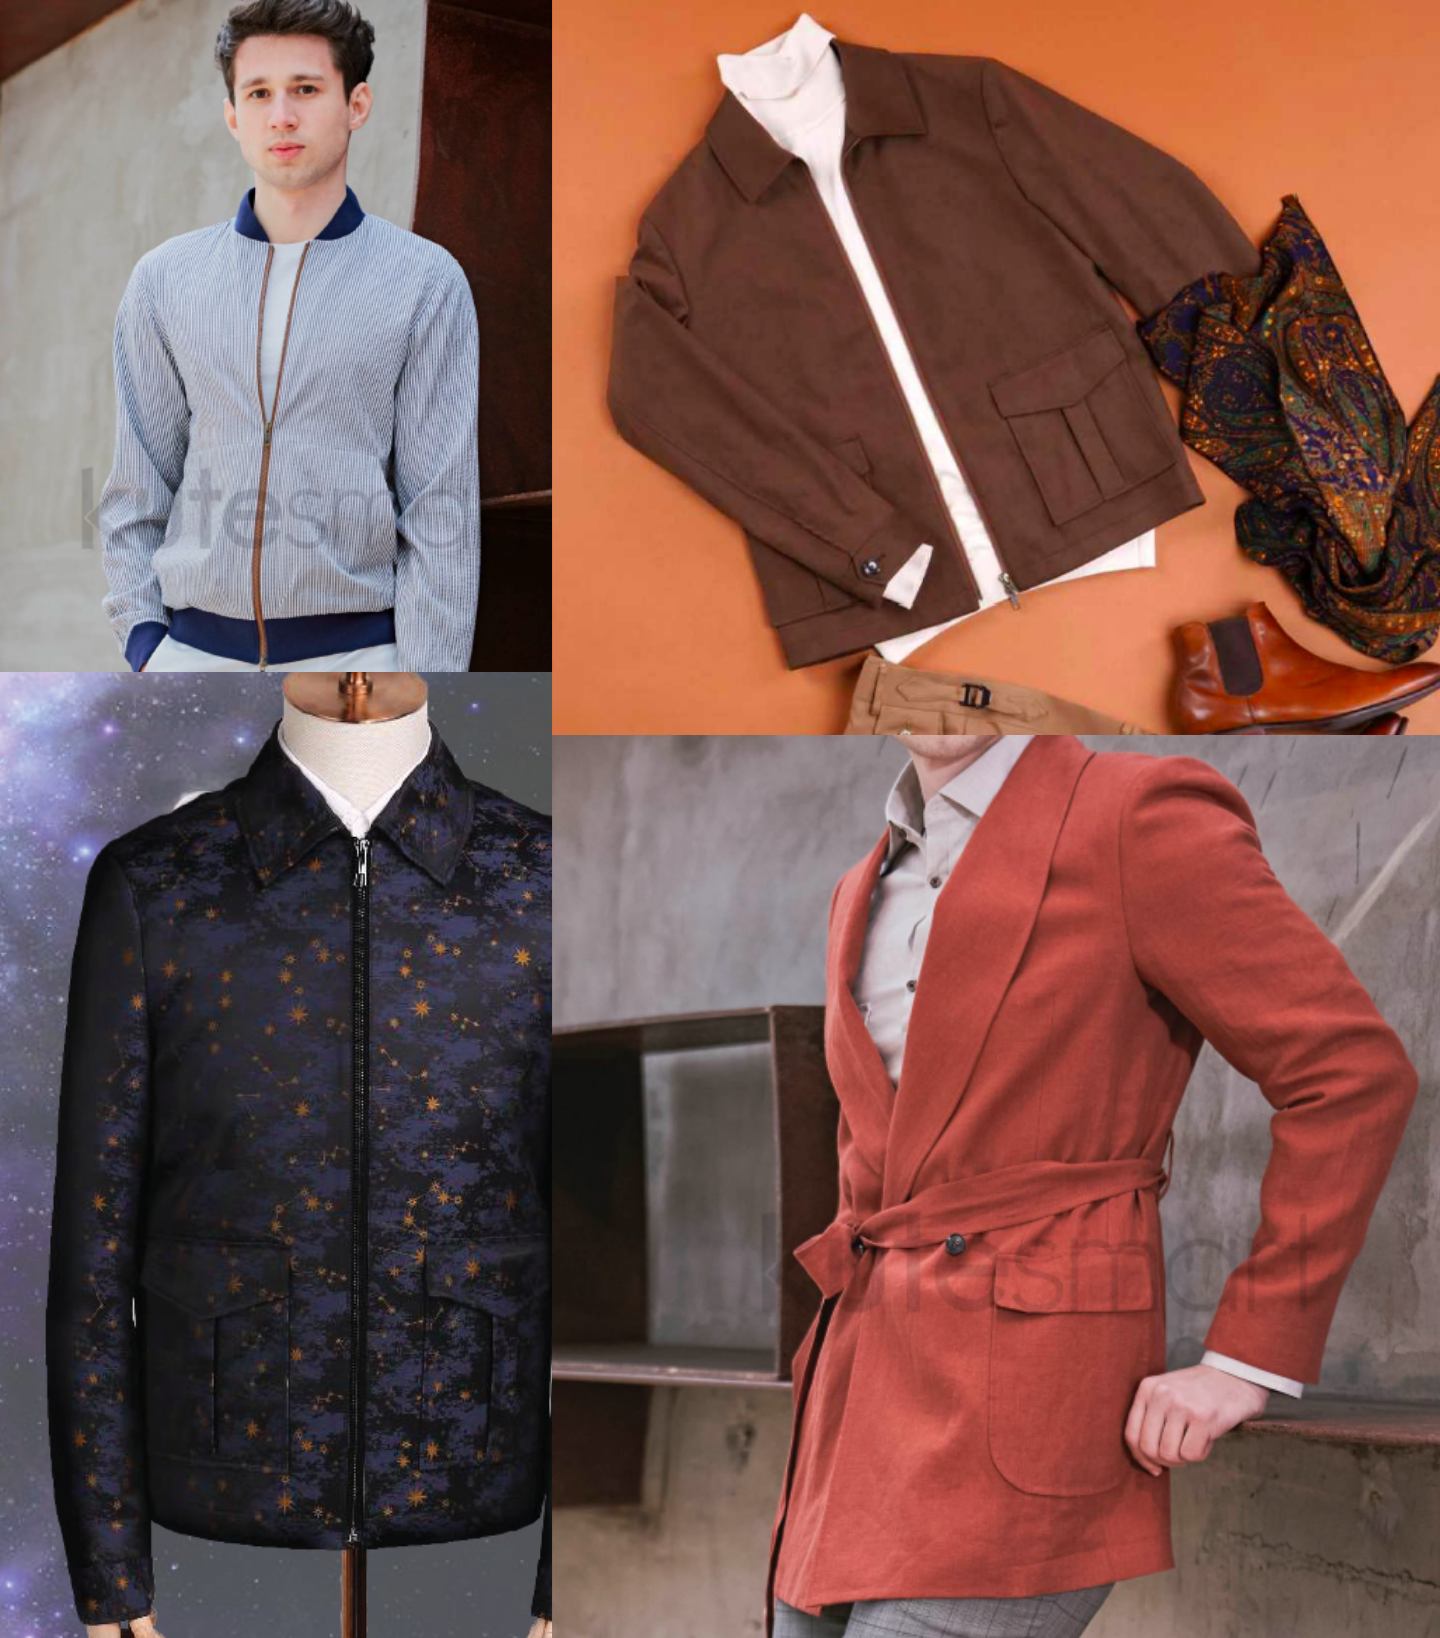 Collage with 4 images of models wearing casual made-to-measure jackets.